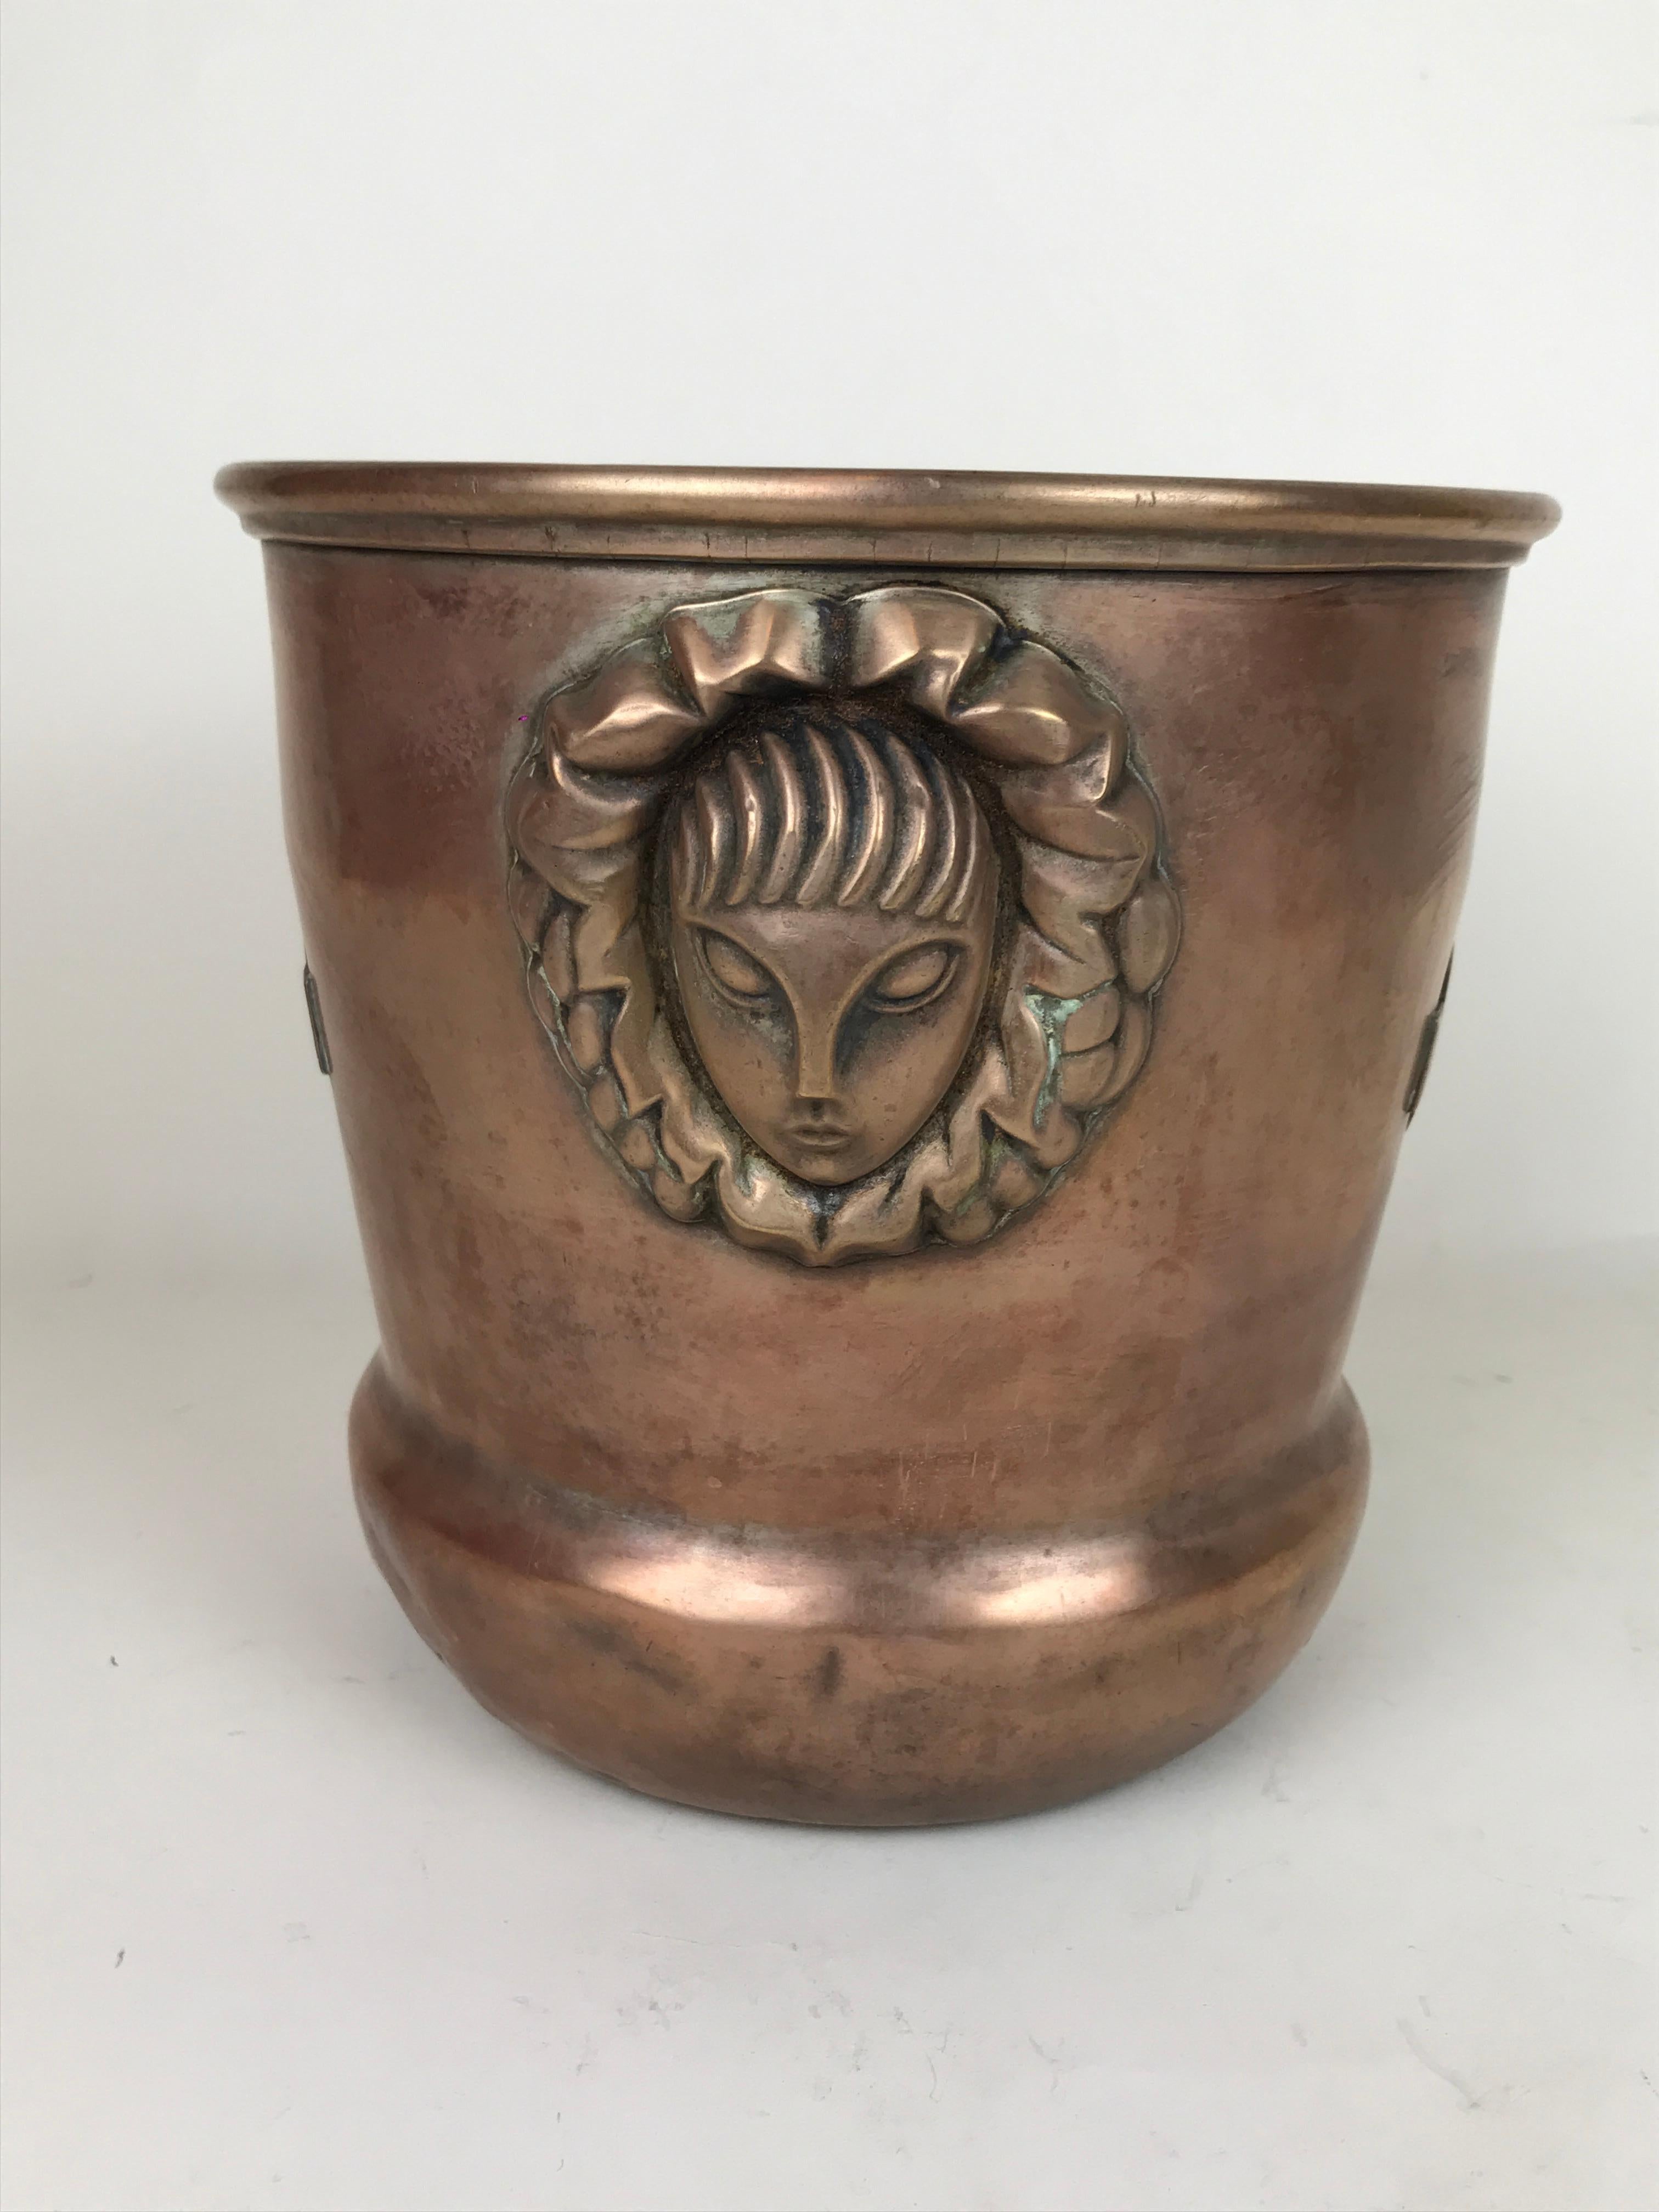 Copper 1930s Vintage Brass Italian Ice Bucket Martini with Art Deco Reliefs Made